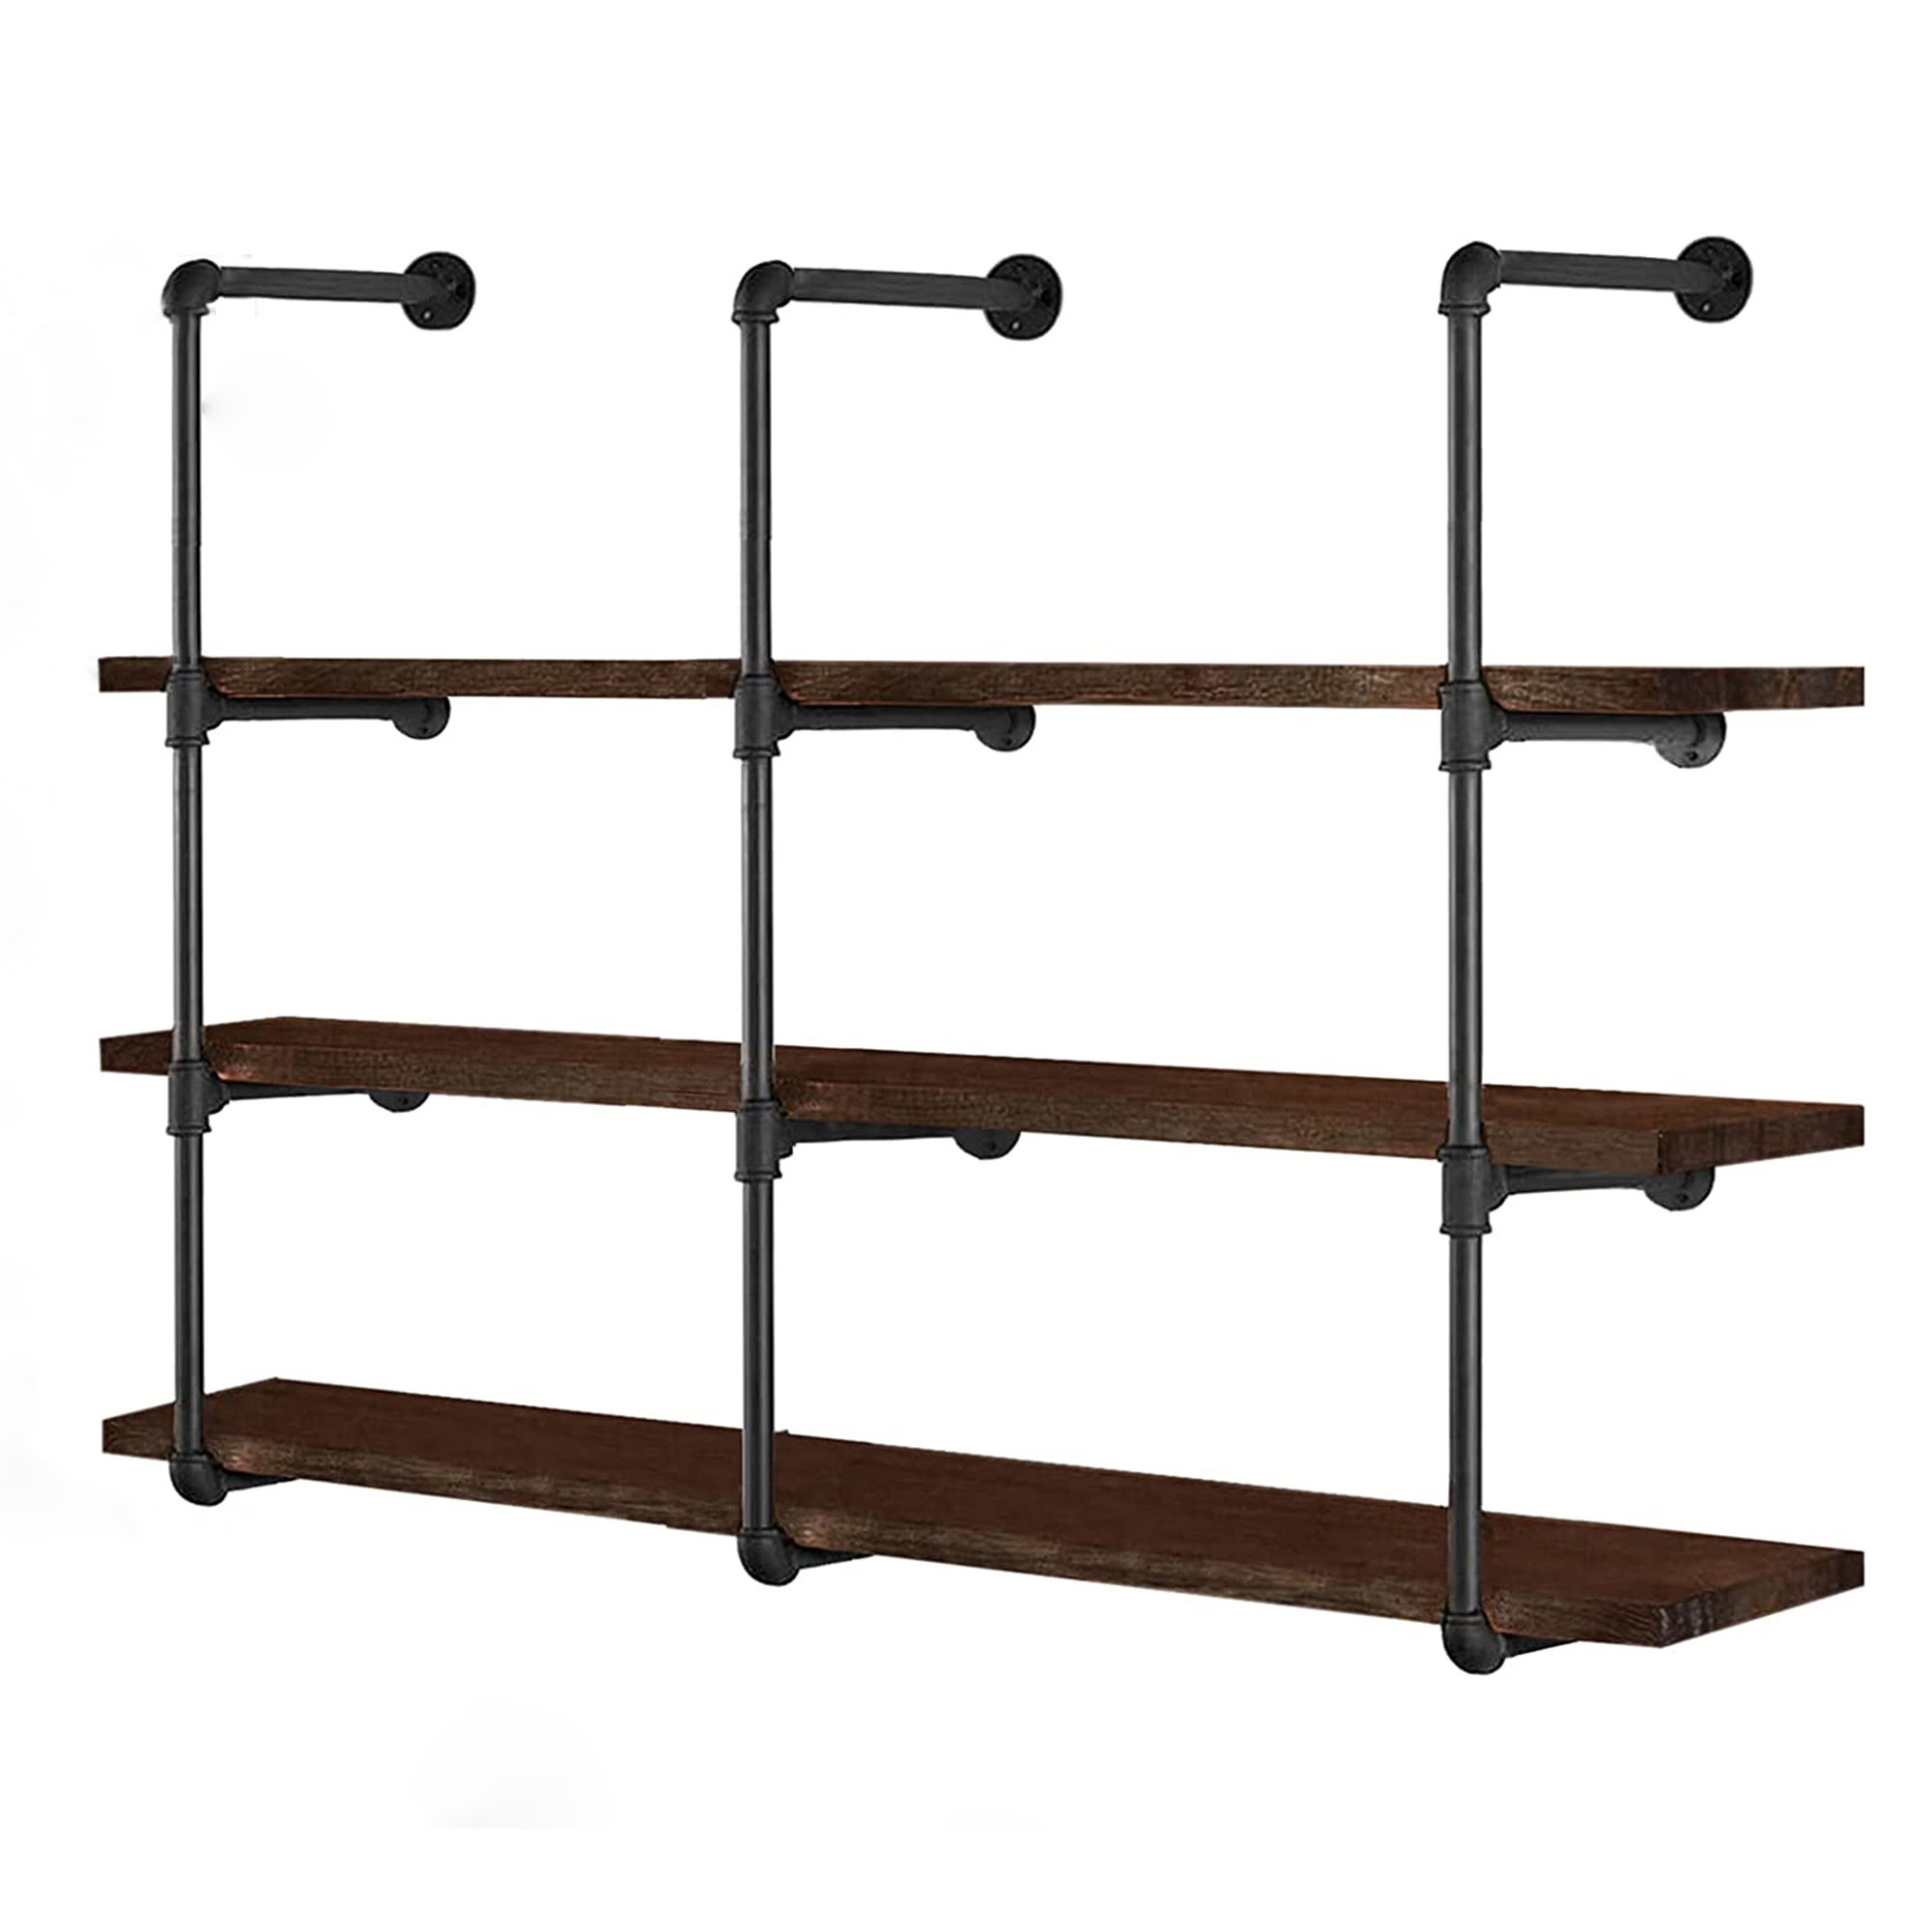 (Wood & Metal 3-Tiered | Planks Style Friedeborn Forge Iron Flanges Not Shelf Included) Black Reviews Williston D.I.Y & Pipe Wayfair